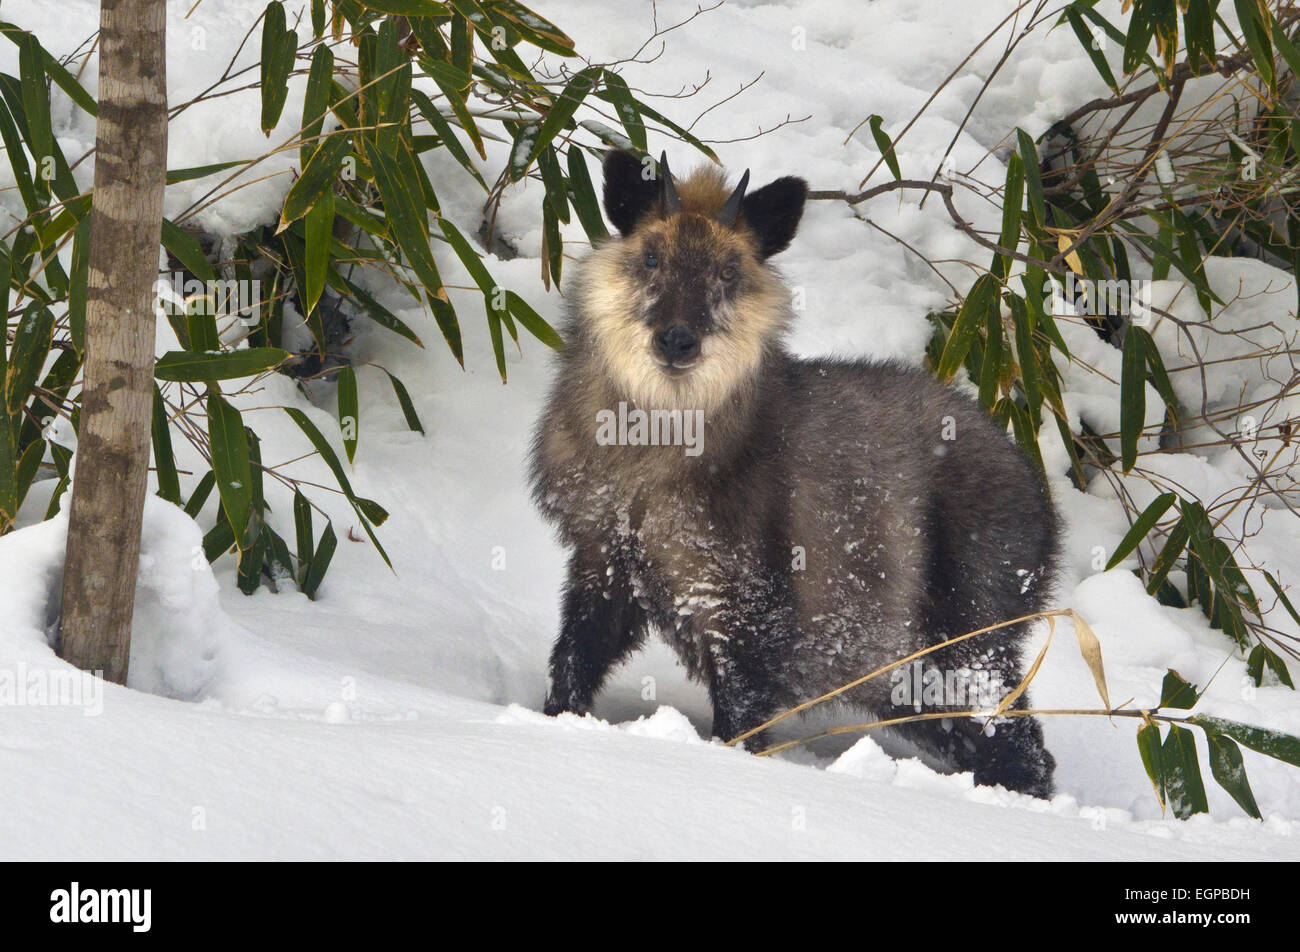 A Japanese Mountain Goat known as a Serow standing in the snow looking at the viewer, in the Oku-Kinugawa region, Japan. Stock Photo